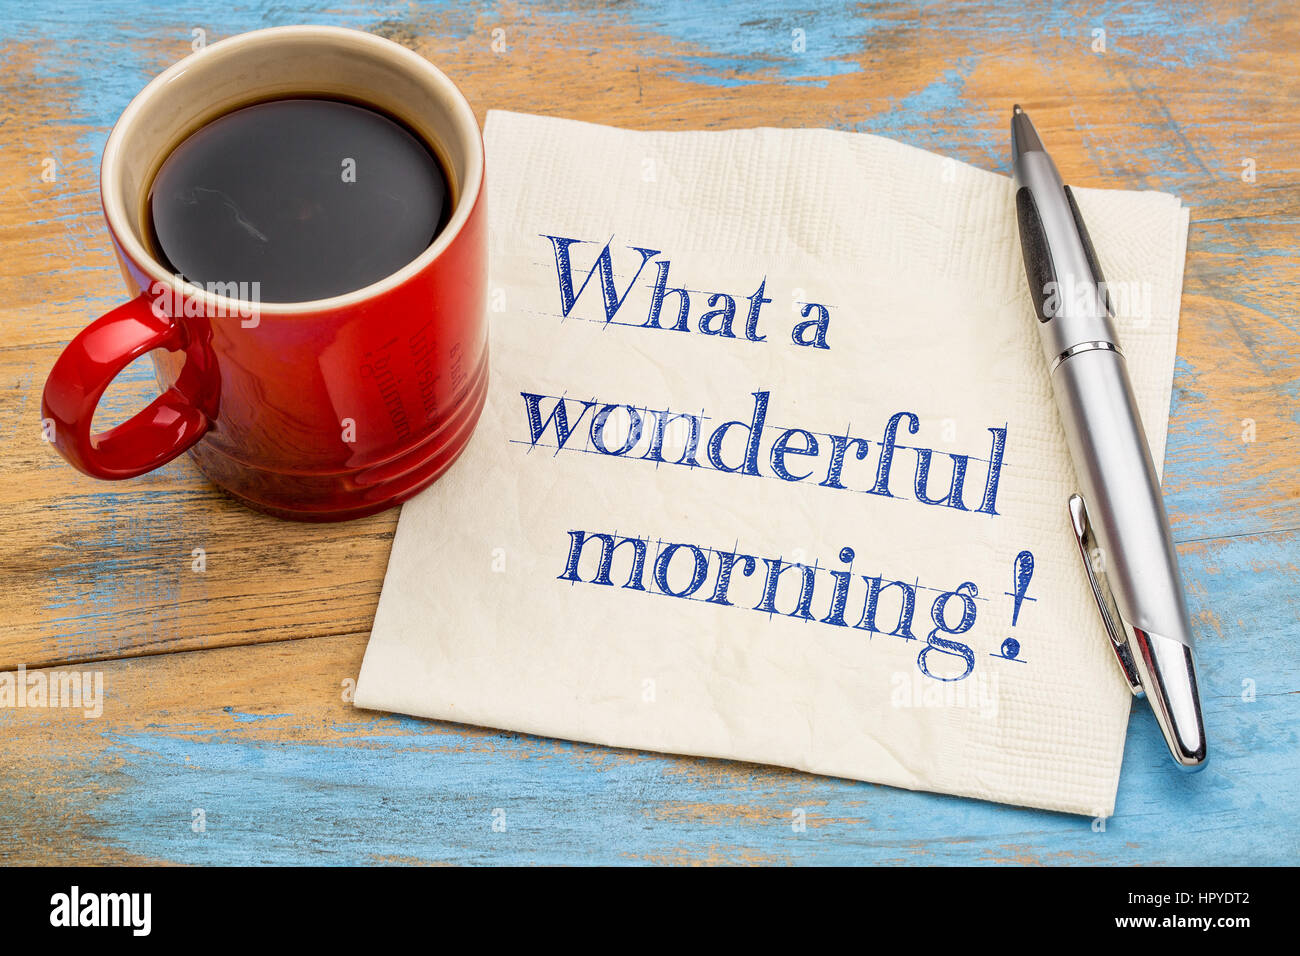 What a wonderful morning - handwriting on a napkin with a cup of coffee Stock Photo